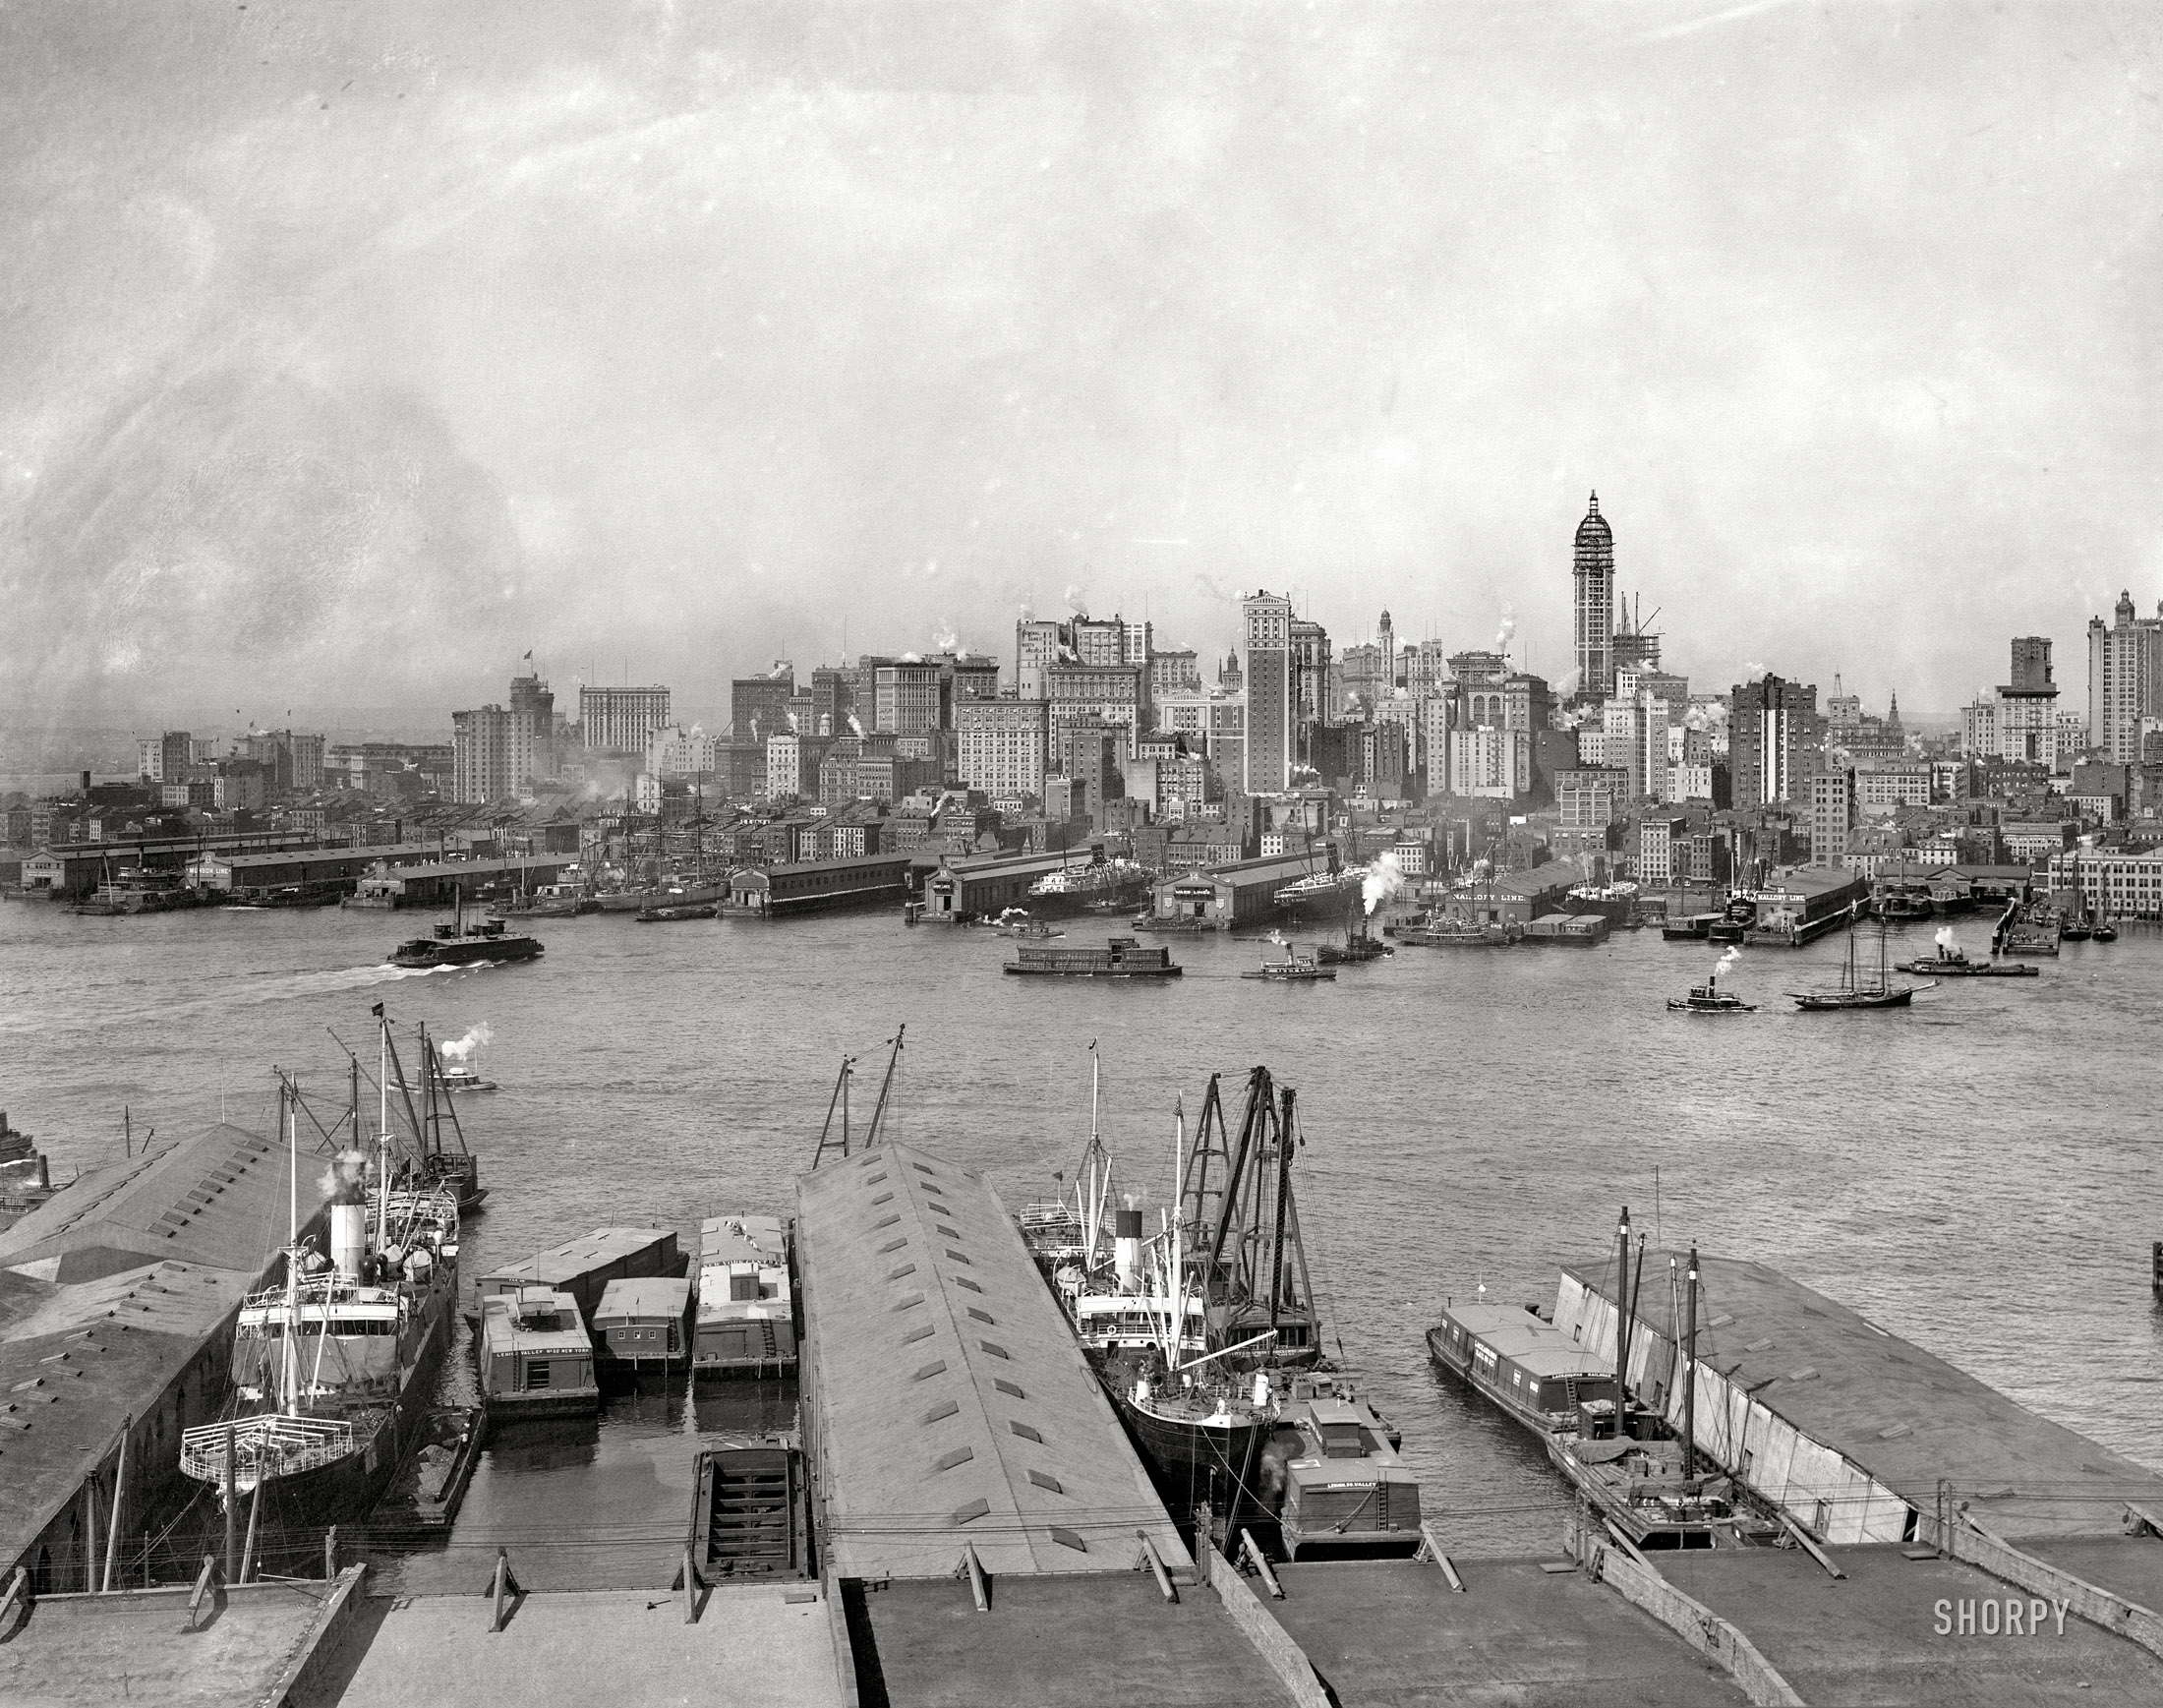 Circa 1907. "The heart of New York (Manhattan skyline from Brooklyn)." The Singer Building rises. 8x10 glass negative, Detroit Publishing Co. View full size.